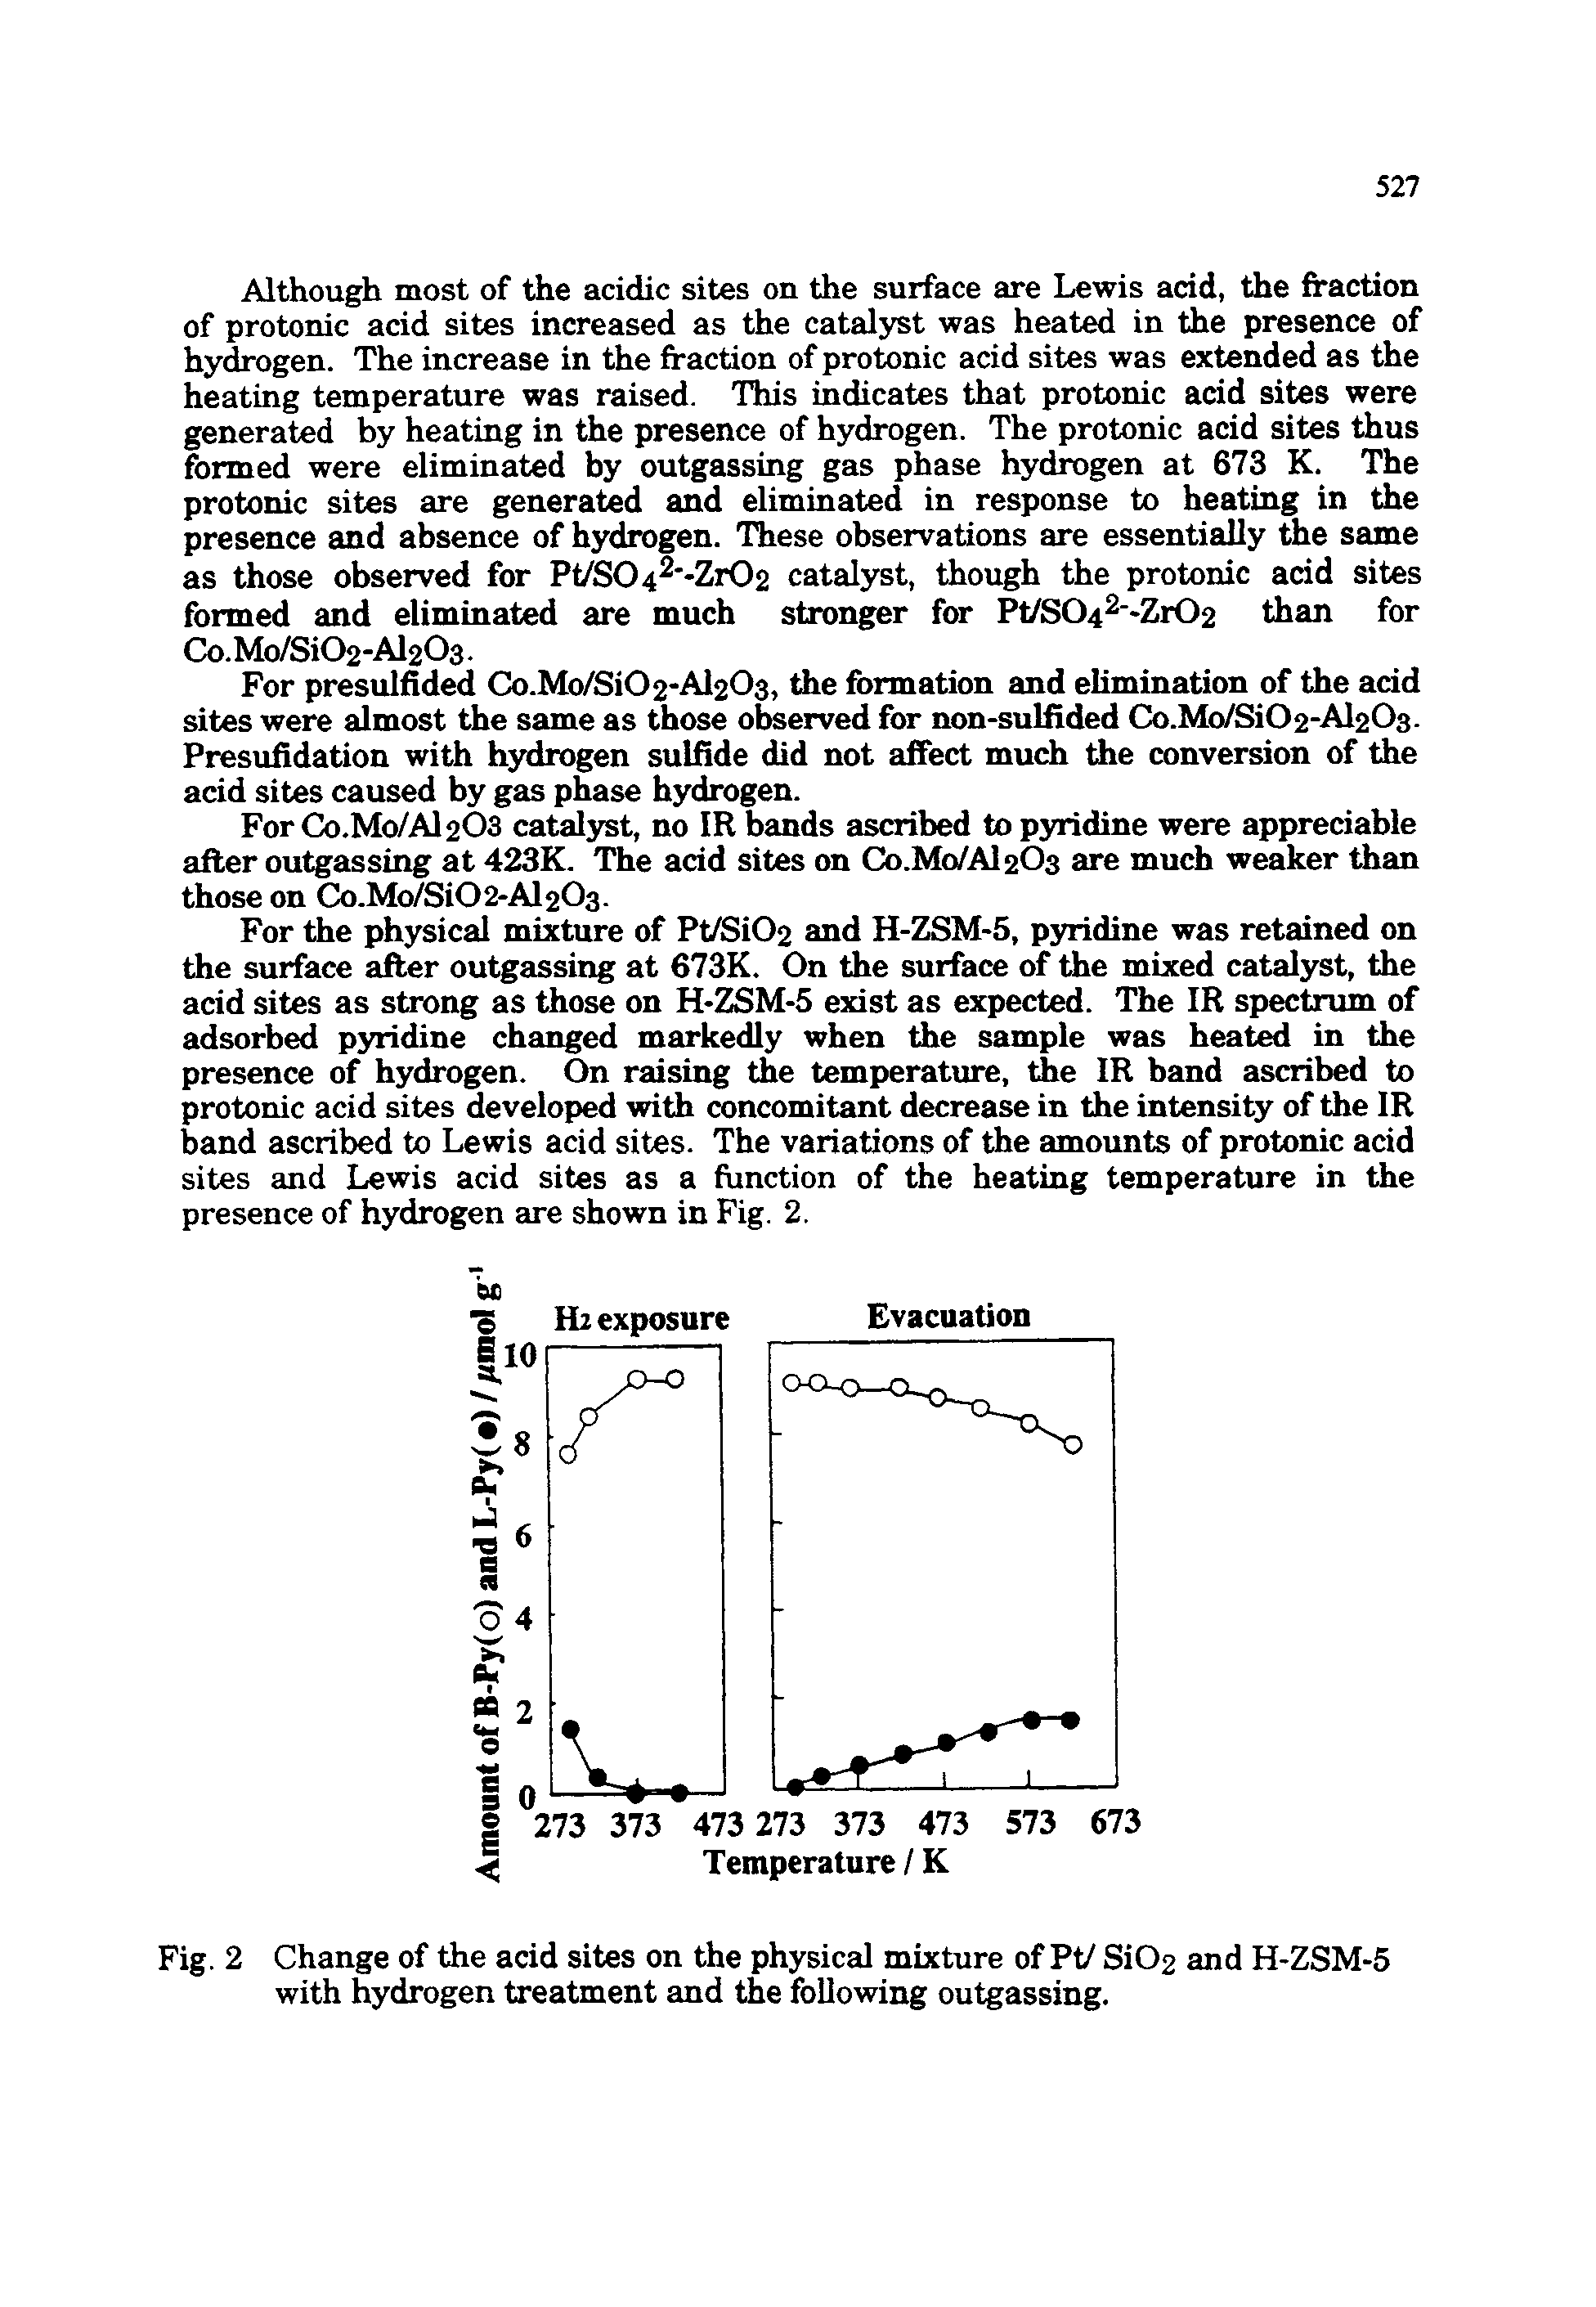 Fig. 2 Change of the acid sites on the physical mixture of Pt/ Si02 and H-ZSM-5 with hydrogen treatment and the following outgassing.